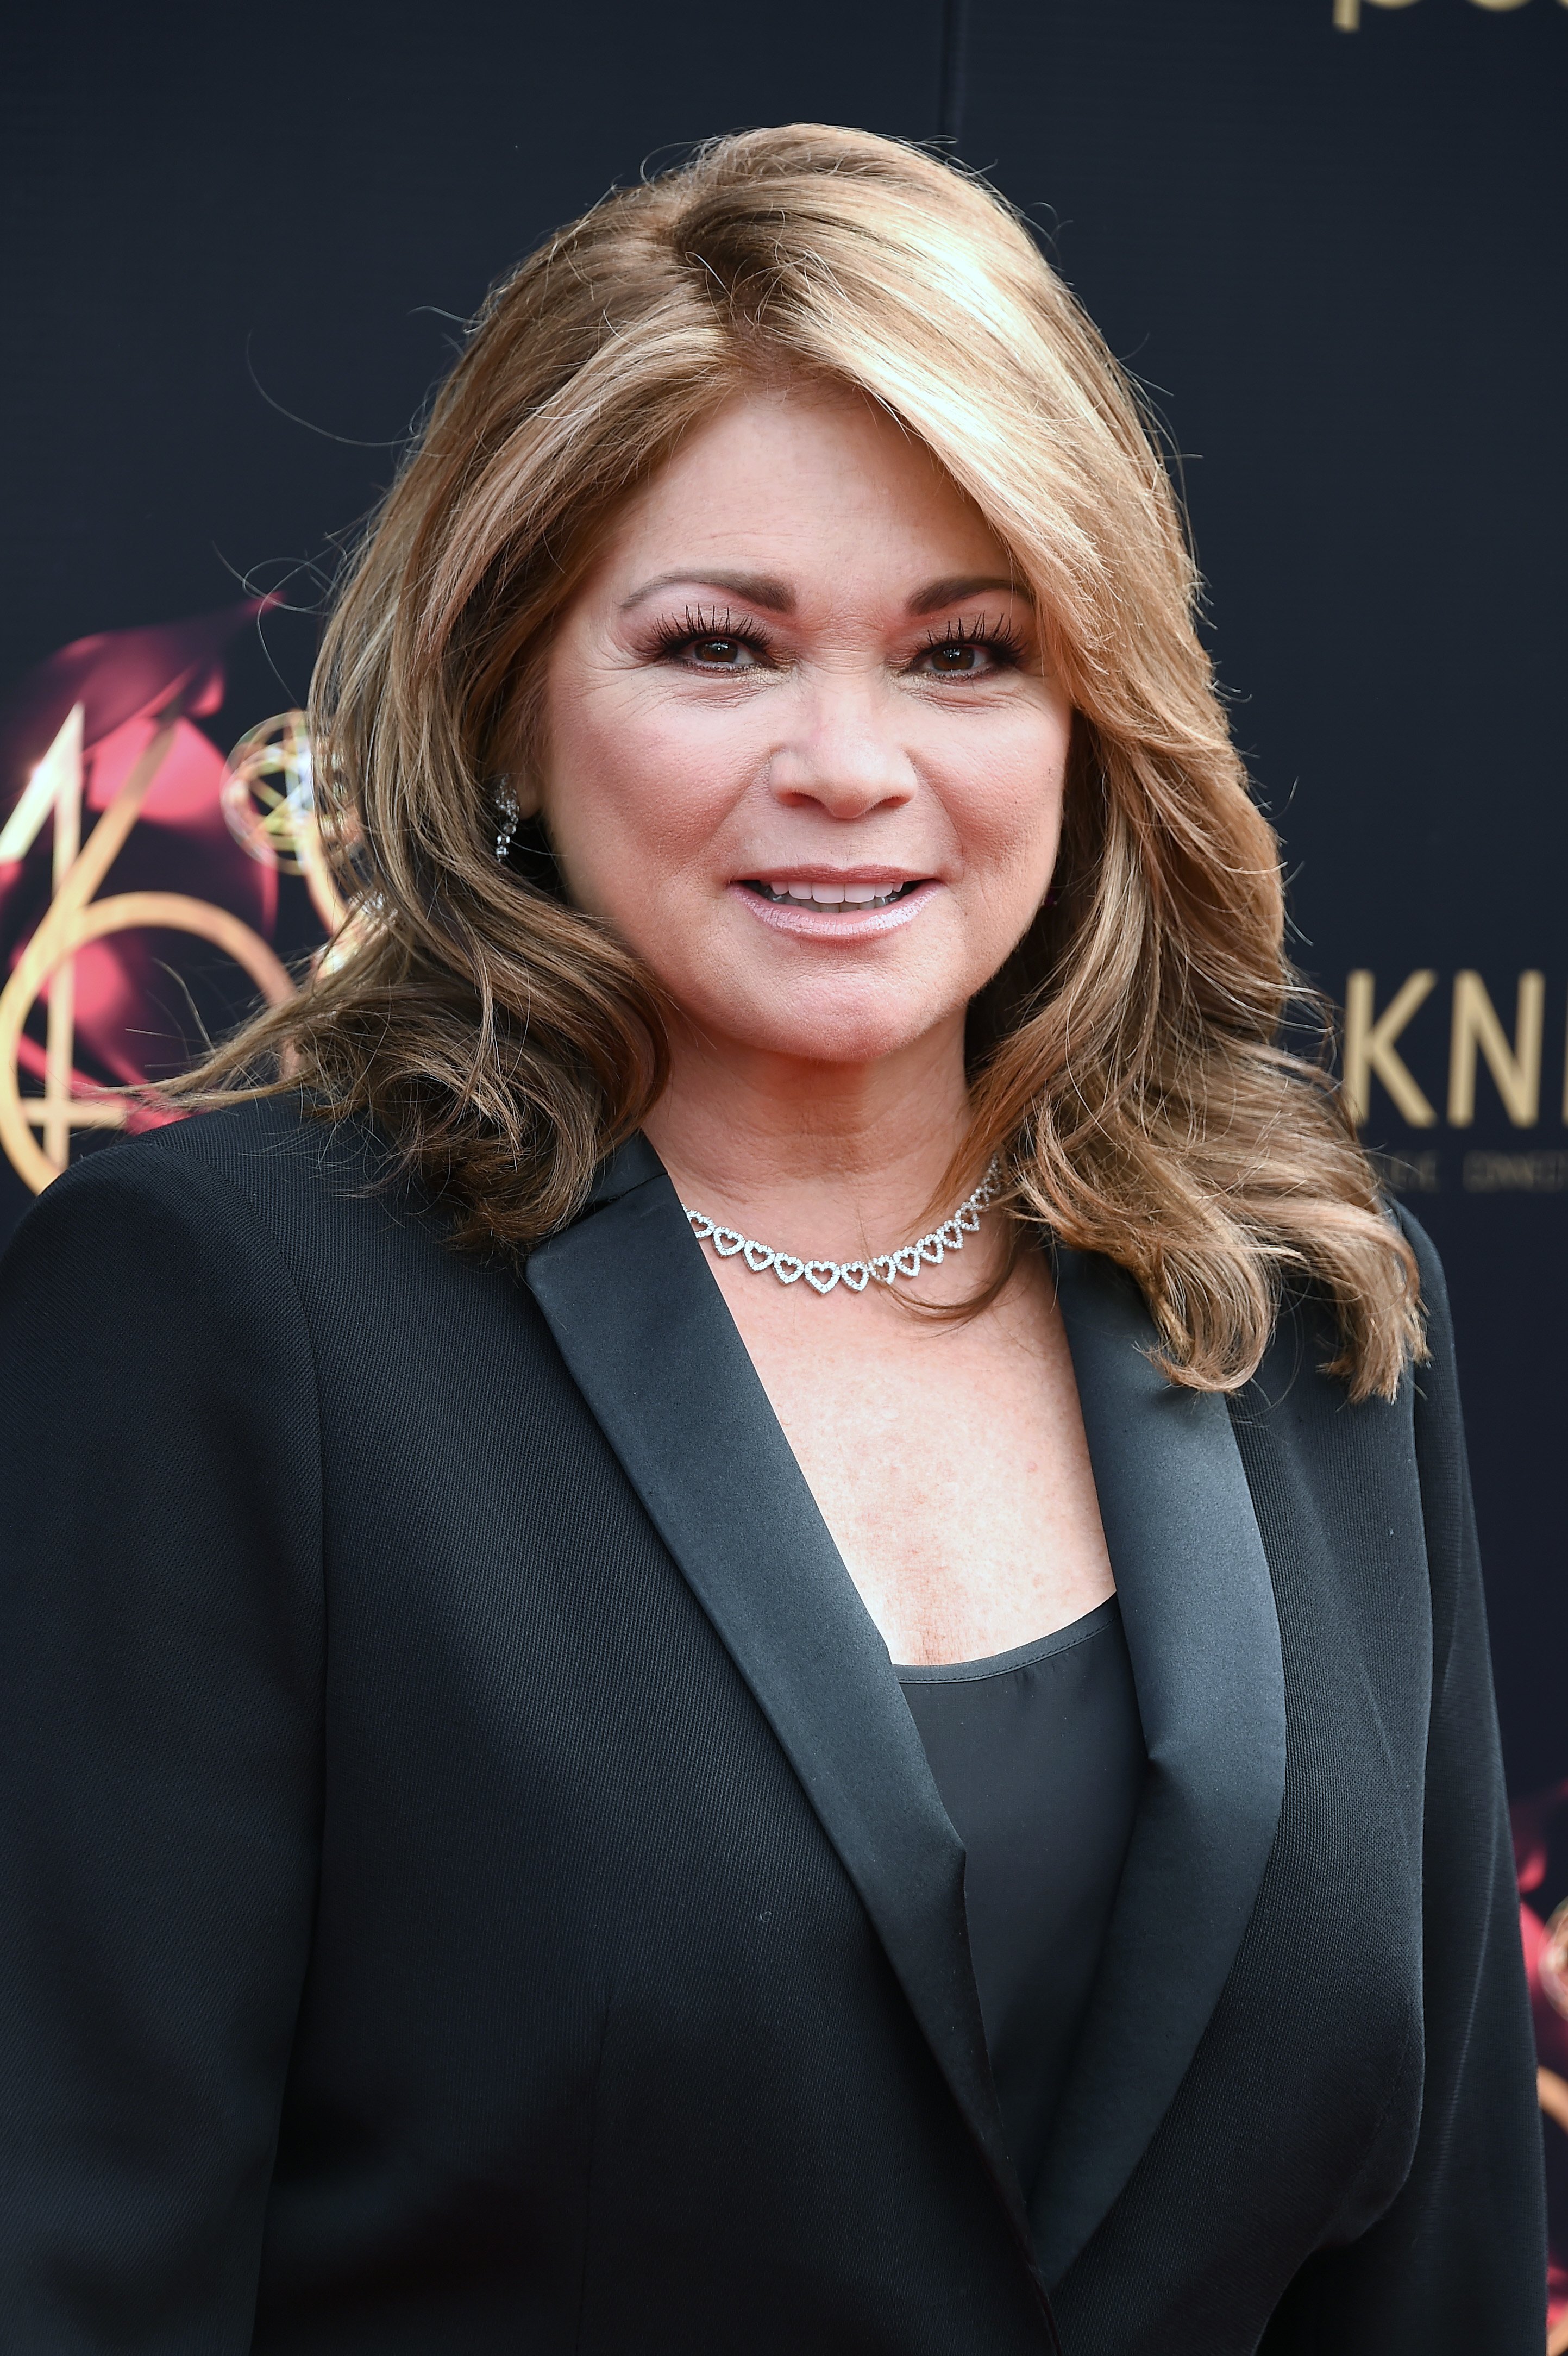 Valerie Bertinelli attends the 46th annual Daytime Emmy Awards at Pasadena Civic Center on May 05, 2019 in Pasadena, California. | Source: Getty Images